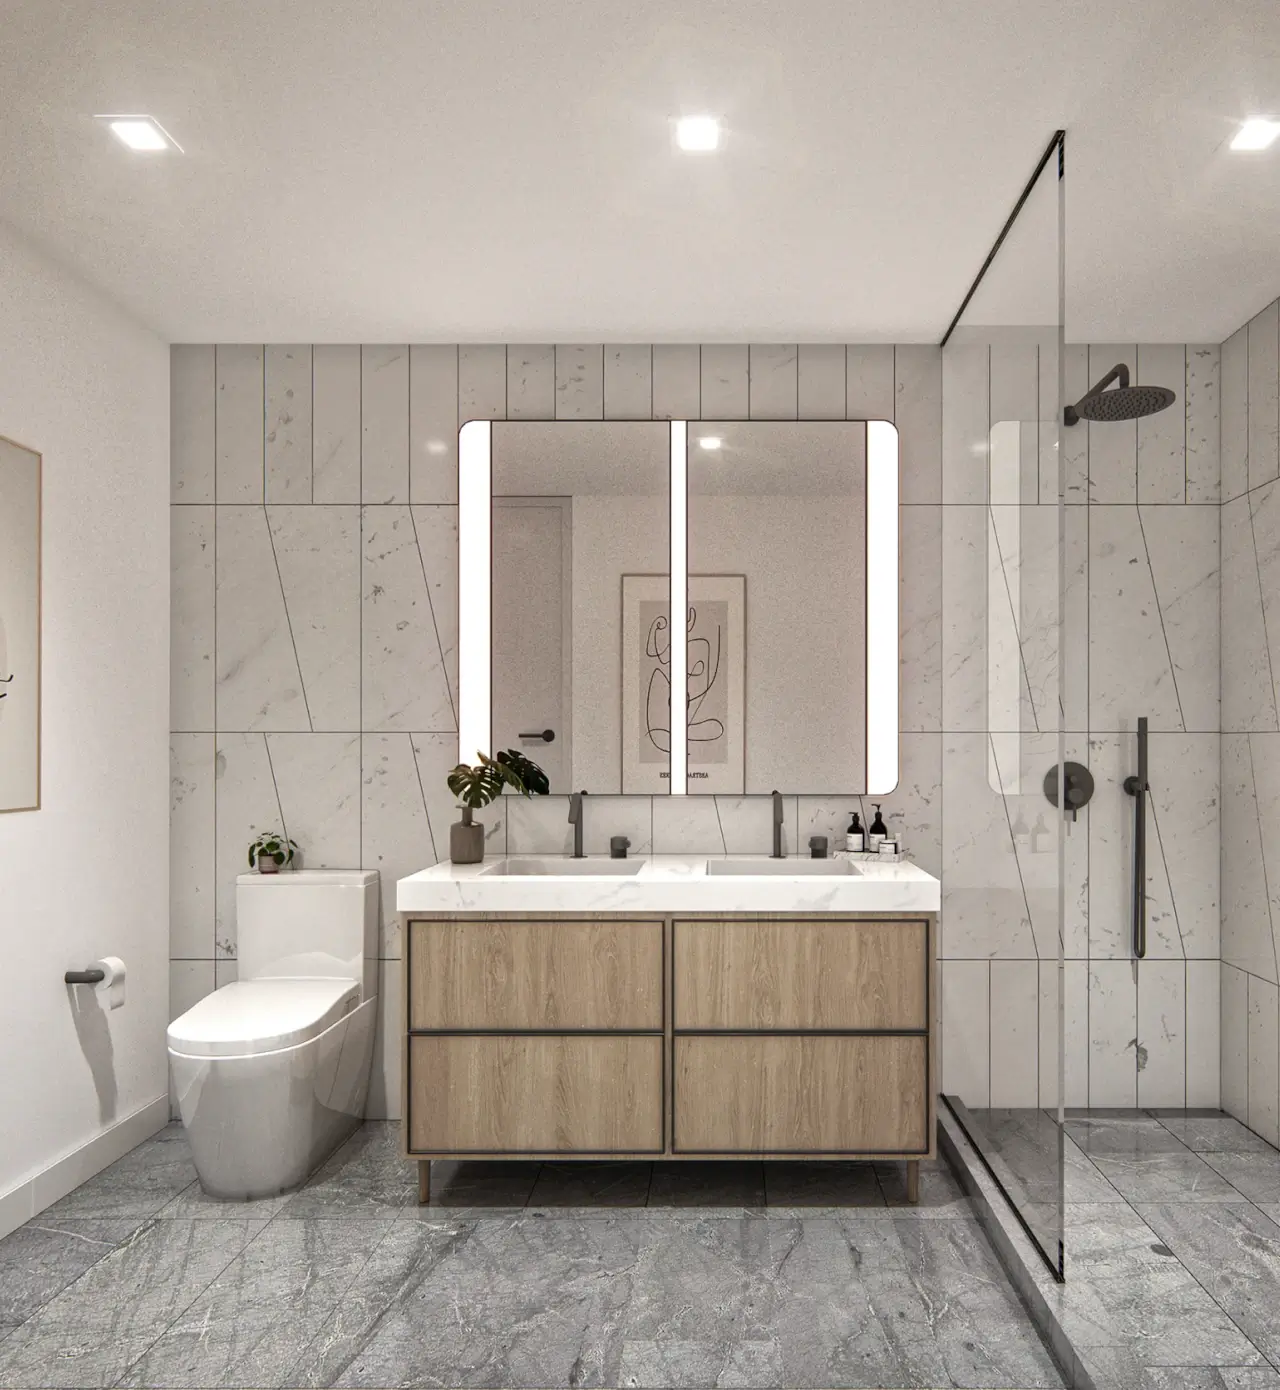 Luxurious master bathroom with elegant fixtures at Hendrix House condominiums in Gramercy, NYC.